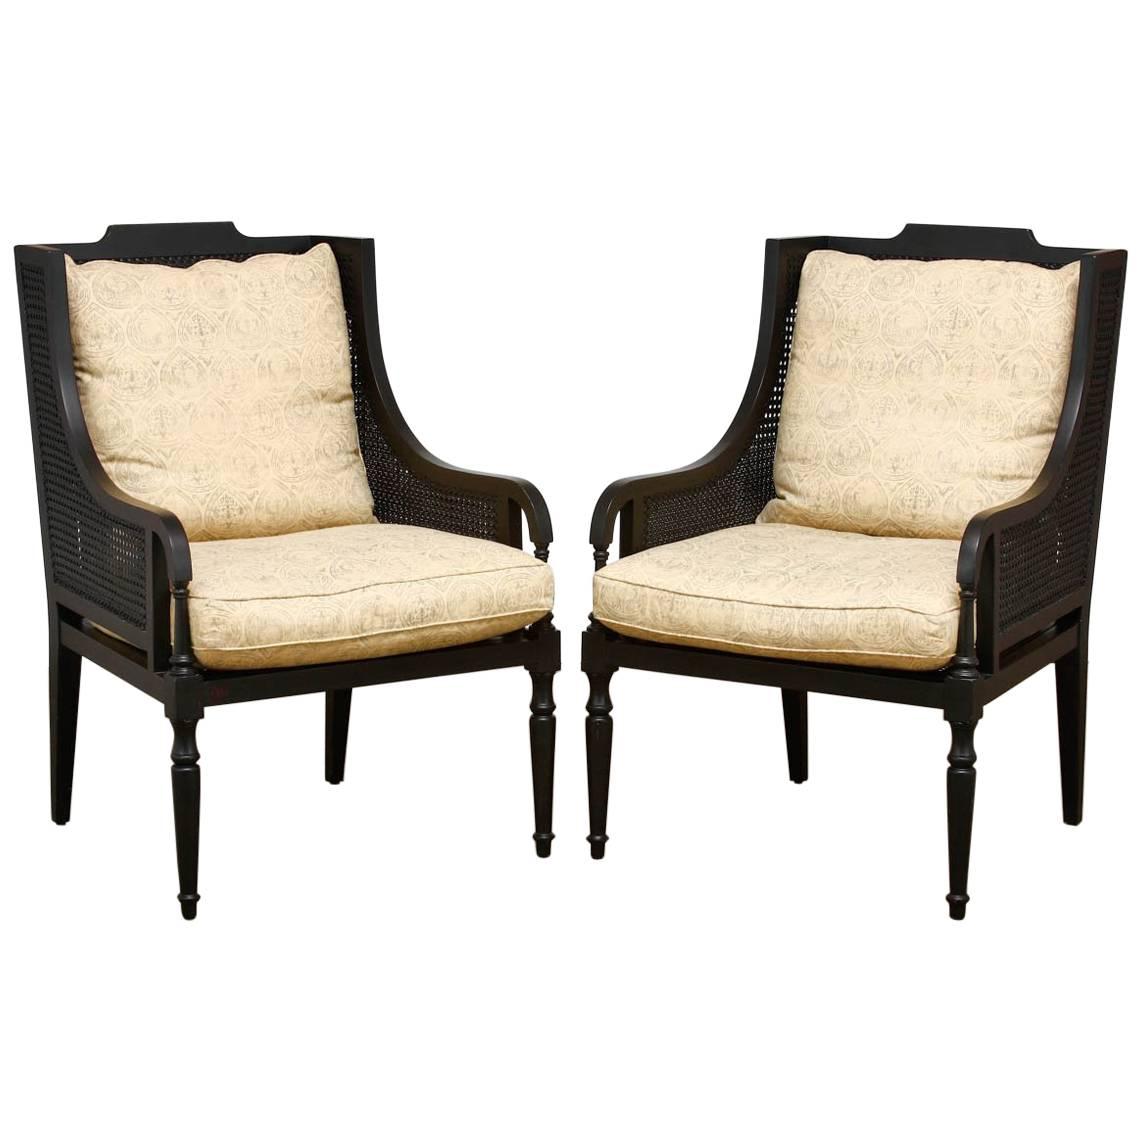 Pair of Contemporary Black Lacquer Caned Wing Chairs